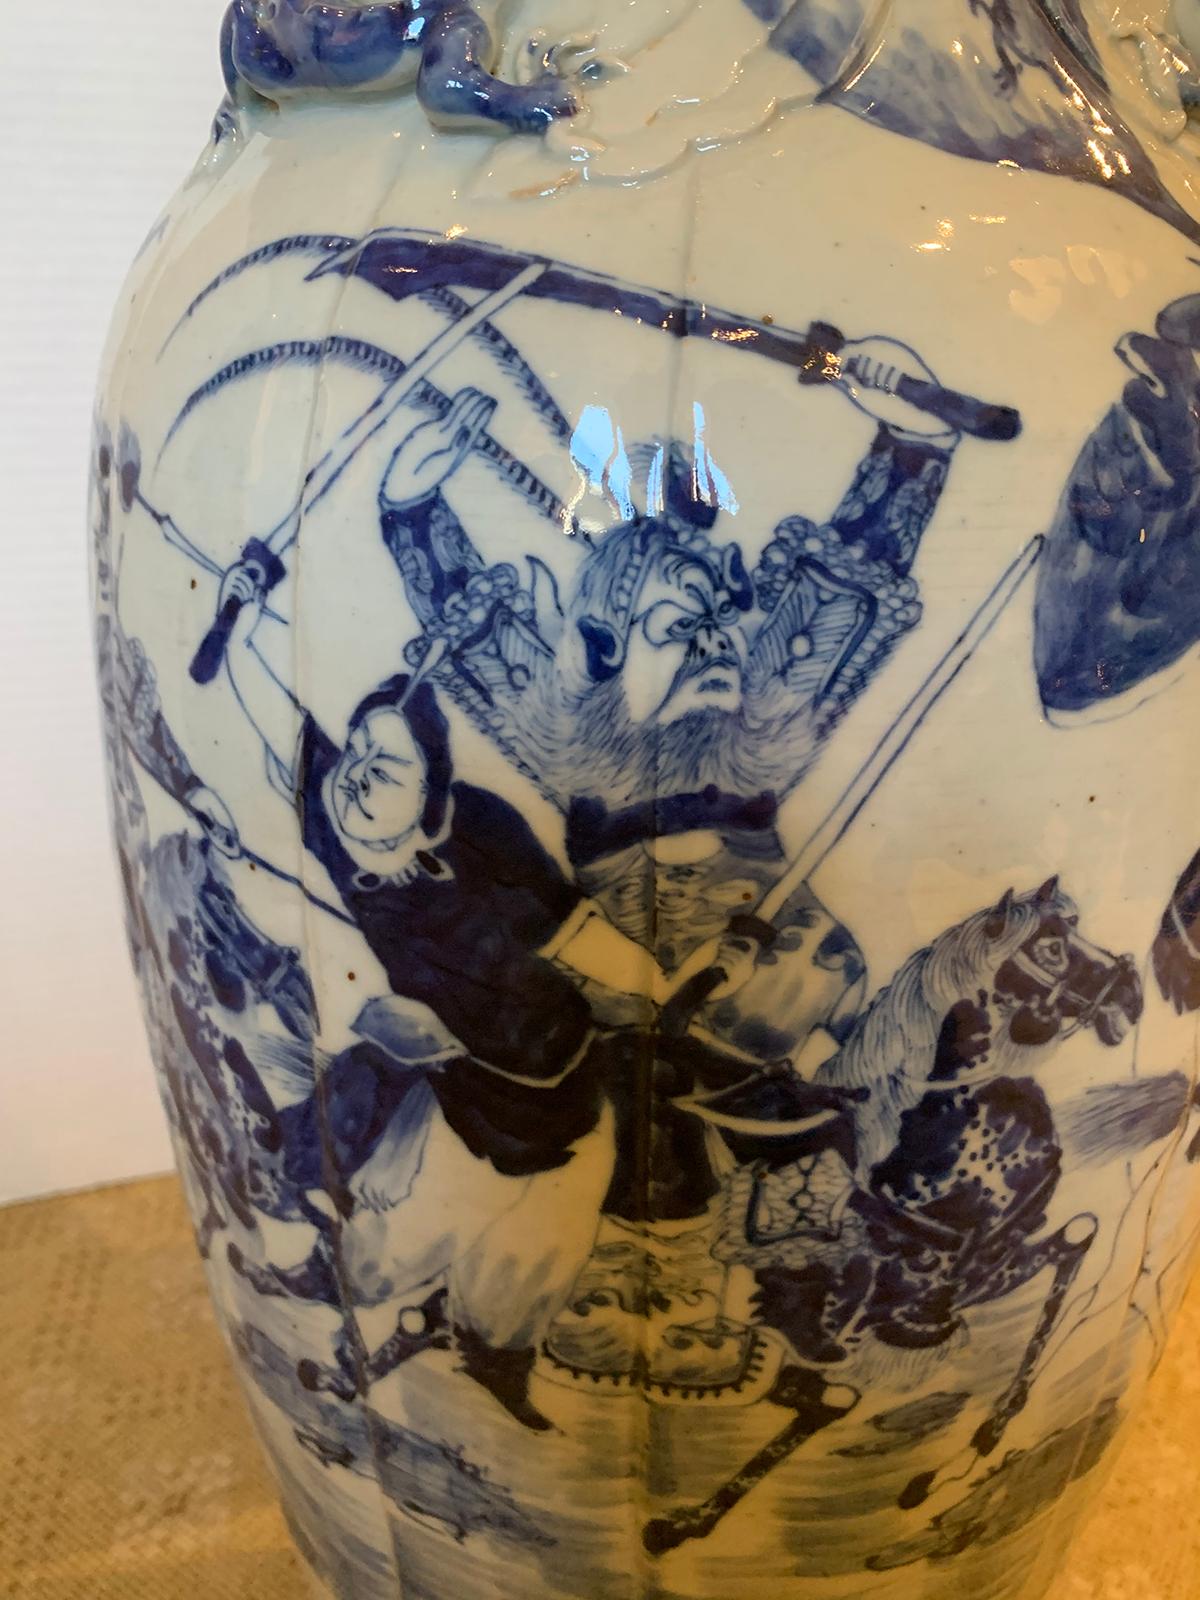 19th century Chinese blue and white porcelain lamp with bronze mounts
New wiring.